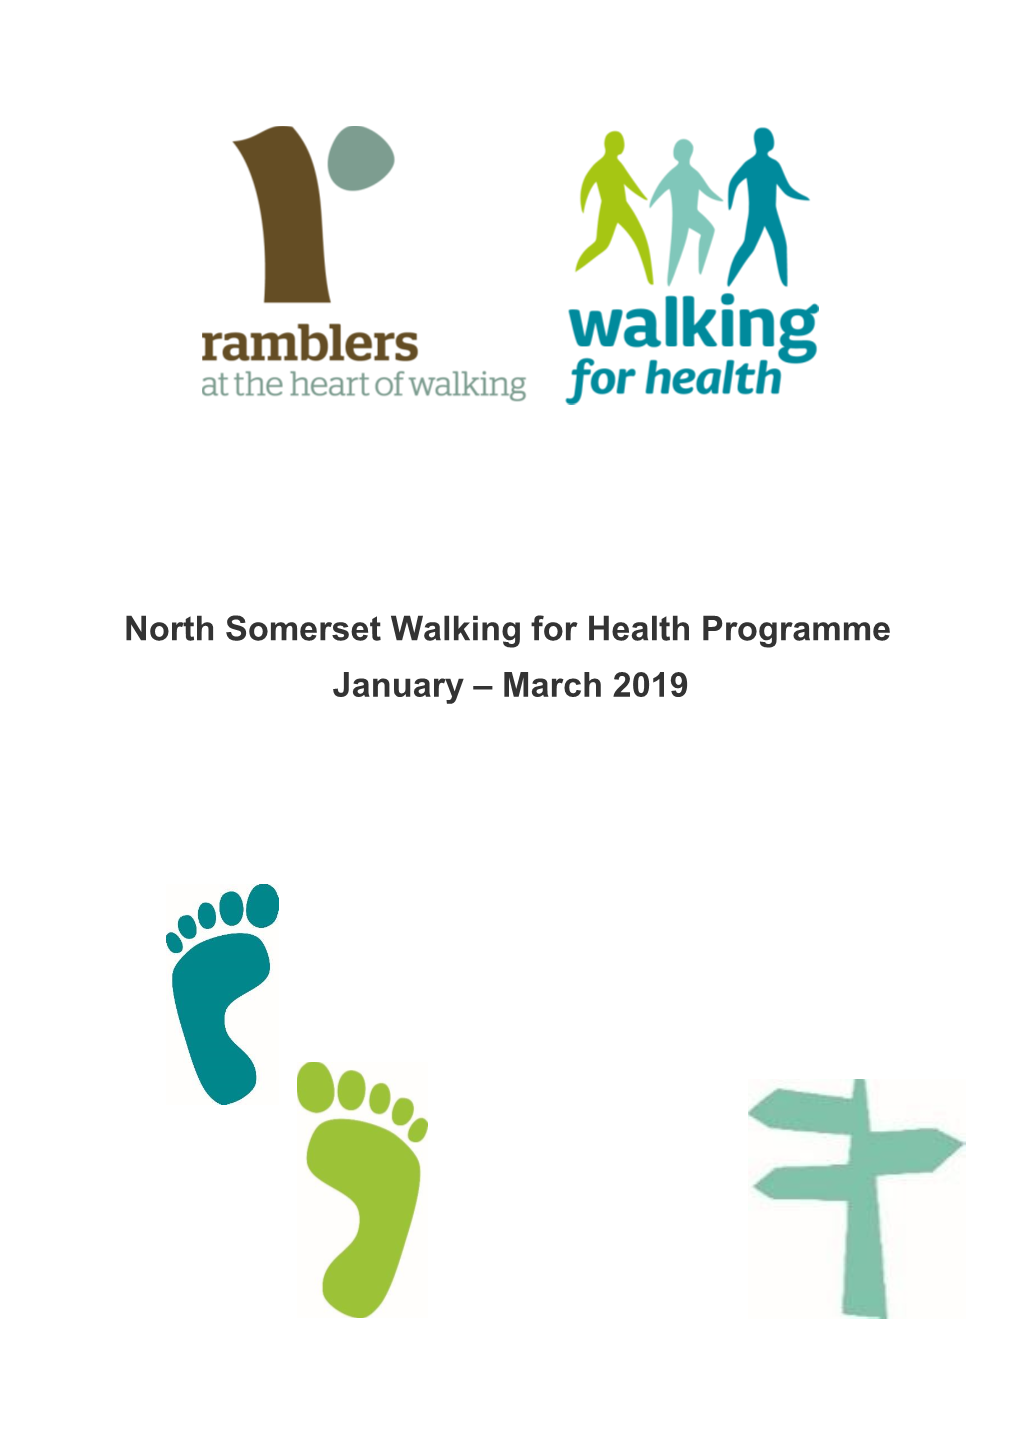 North Somerset Walking for Health Programme January – March 2019